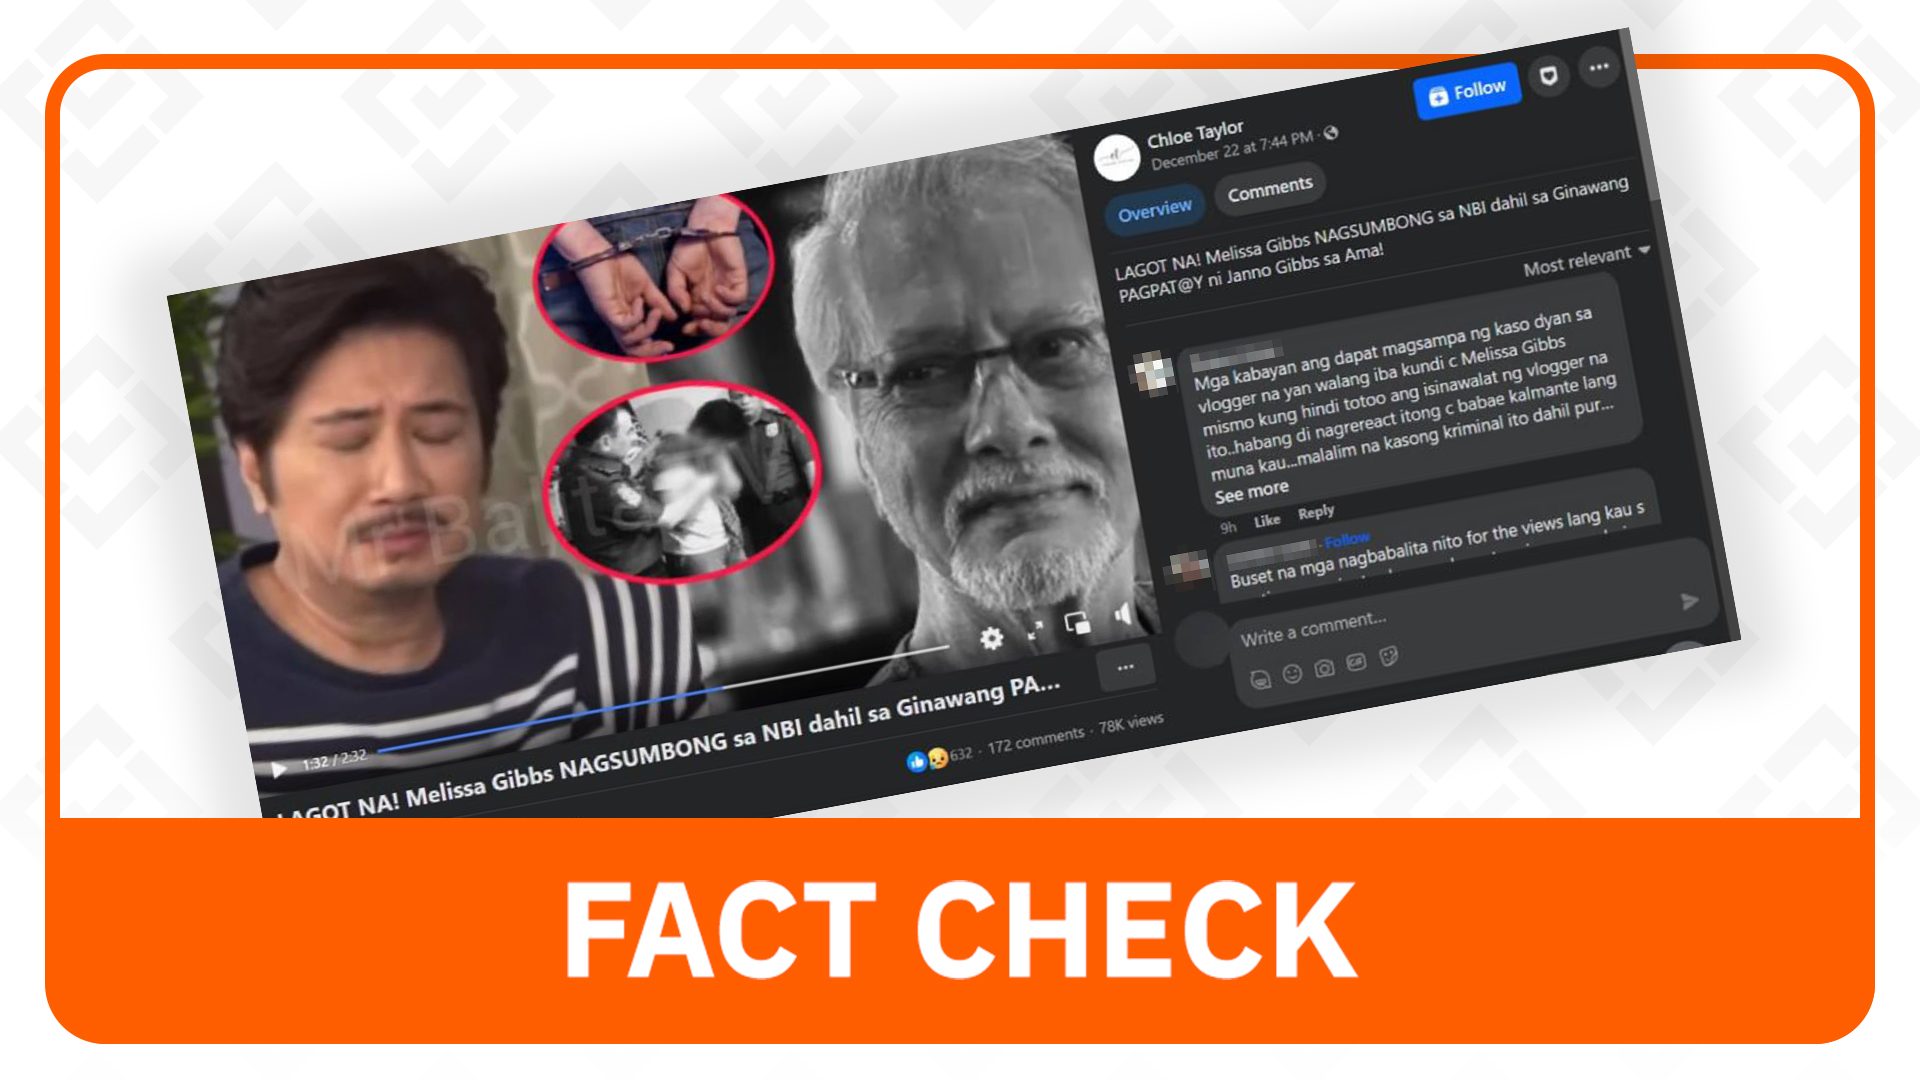 FACT CHECK: Janno Gibbs not involved in death of father Ronaldo Valdez